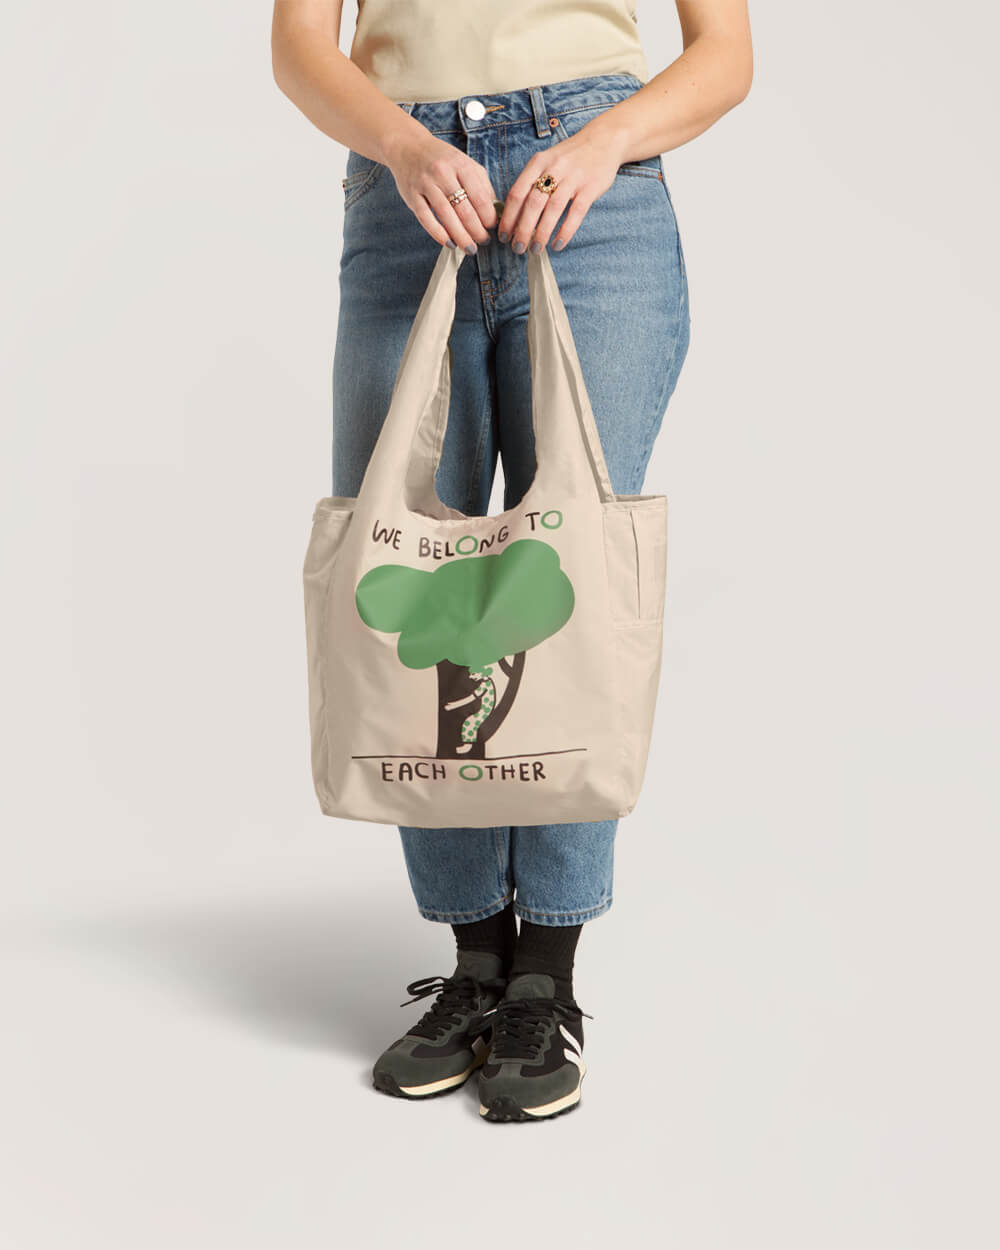 The Packable Tote - Noon Blue  Reusable tote bag made from recycled  materials